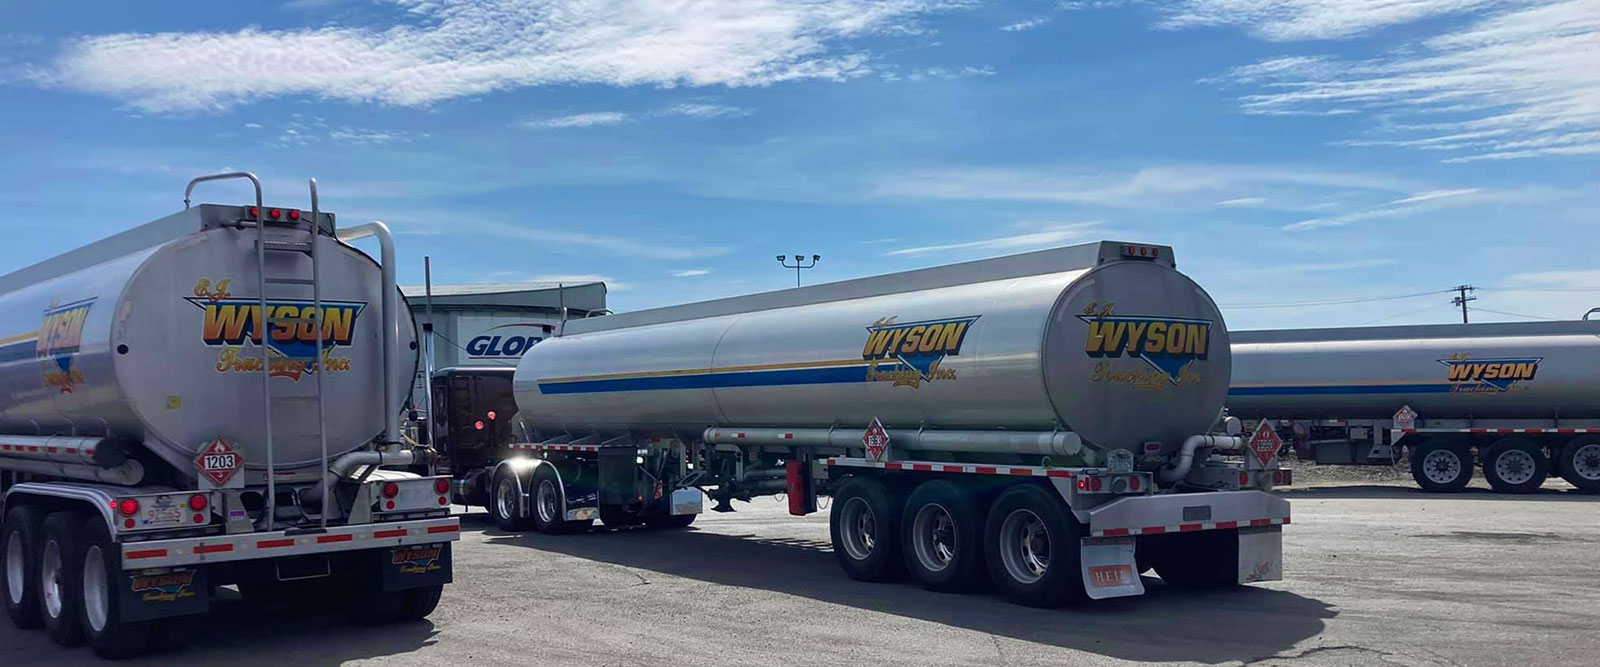 Wyson Trucking Oil Tankers